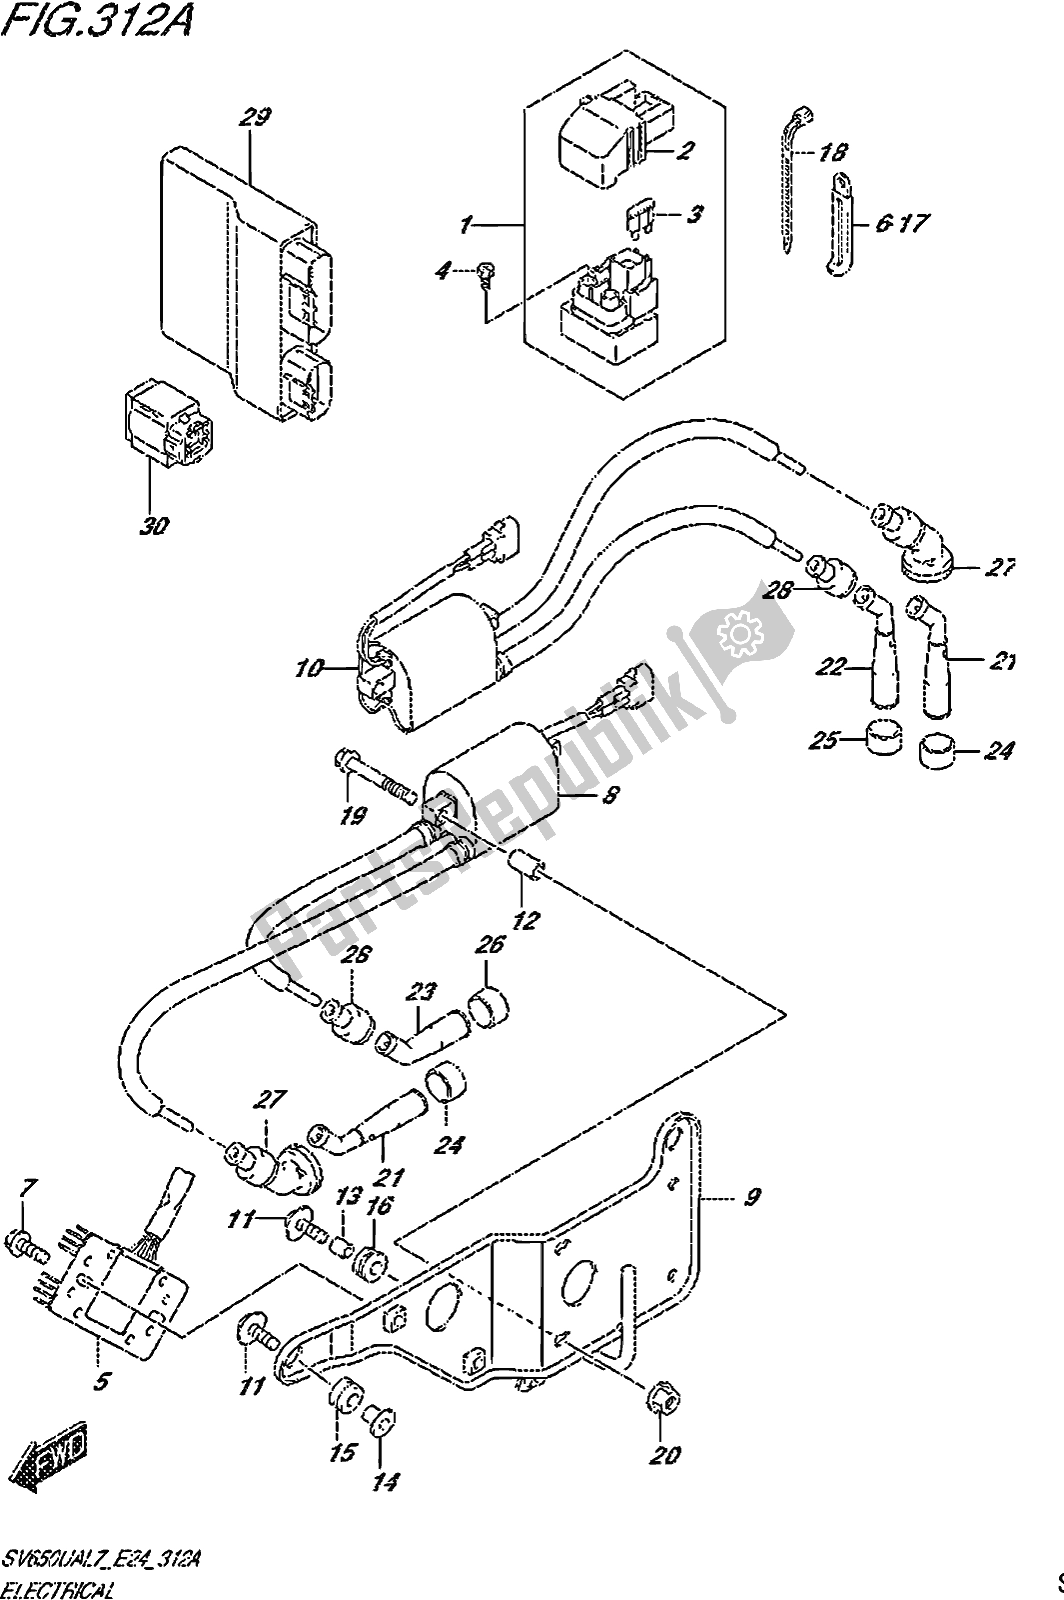 All parts for the Fig. 312a Electrical of the Suzuki SV 650 UA 2017